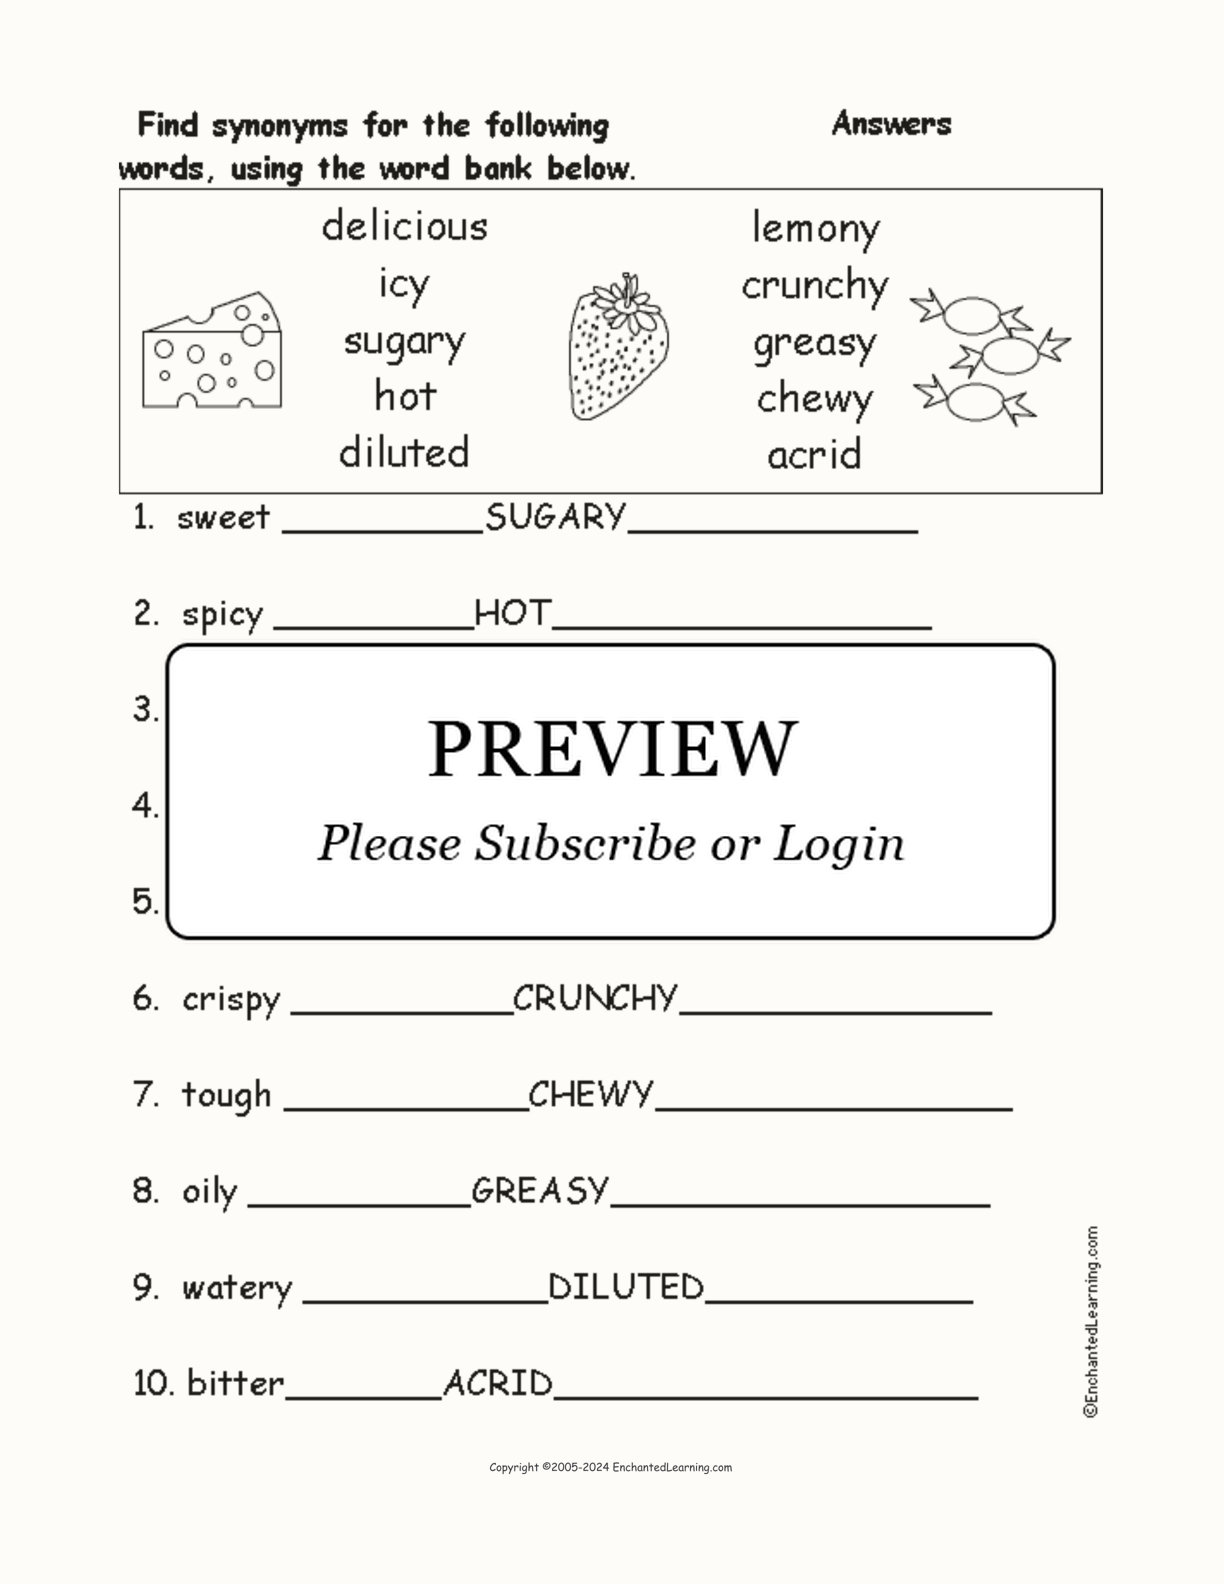 Food Synonyms interactive worksheet page 2